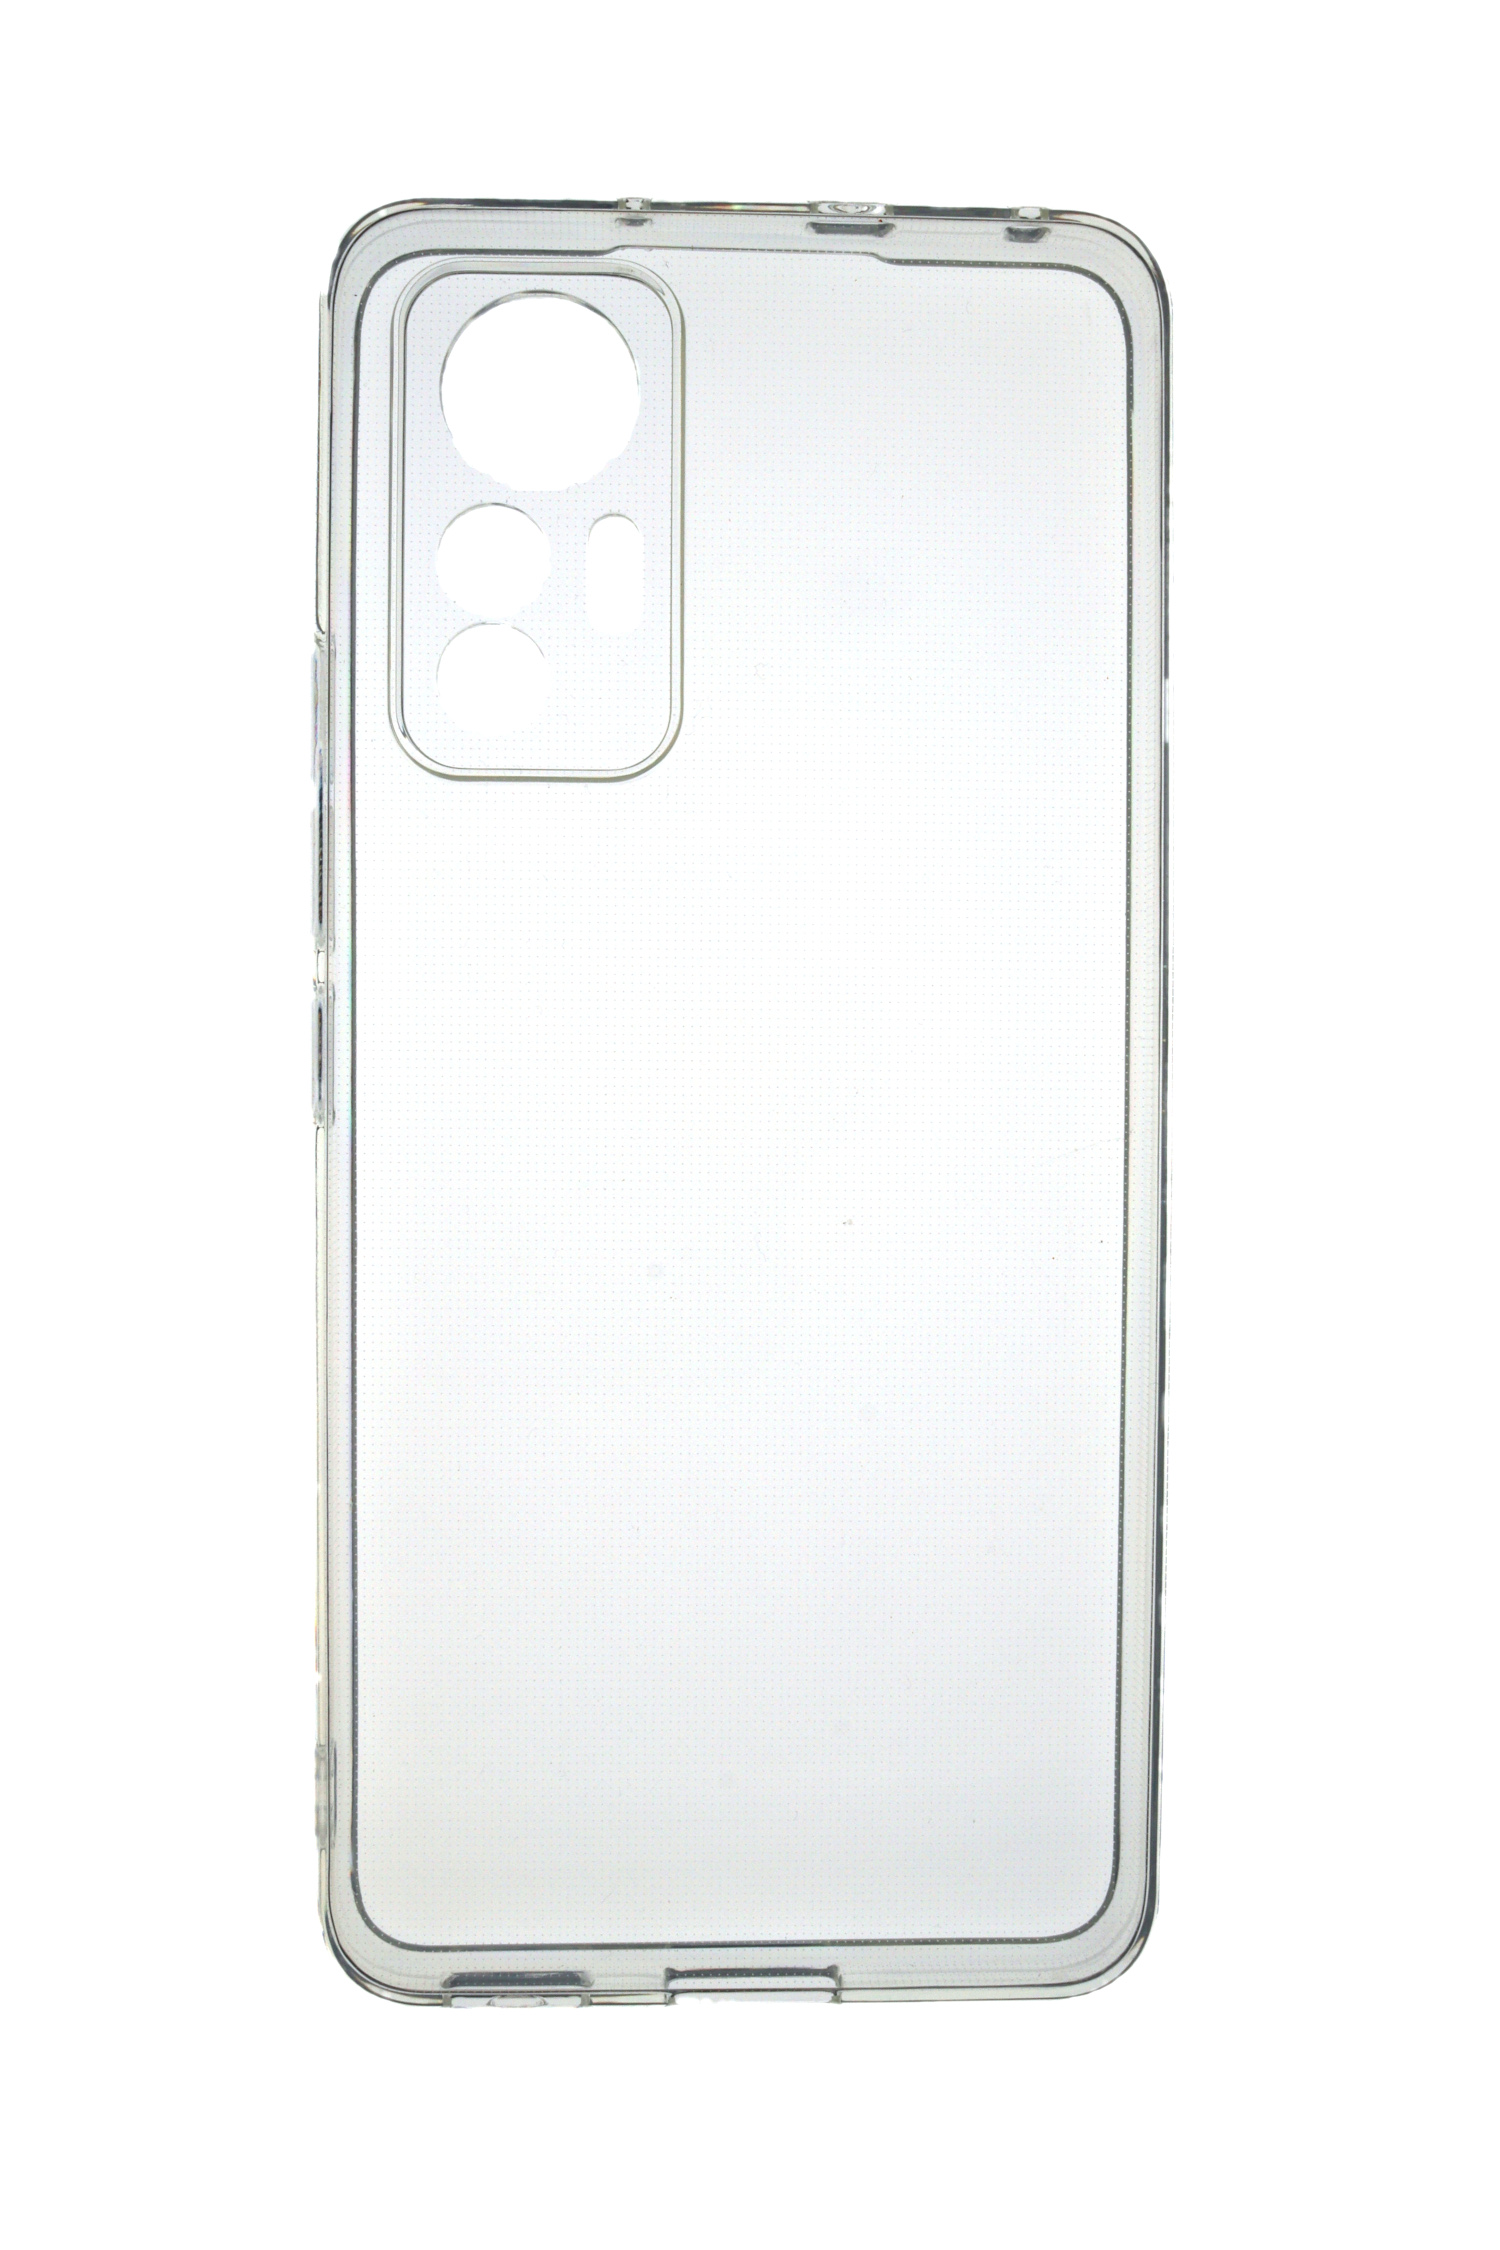 12 Strong, Transparent Backcover, Case Lite, Xiaomi, JAMCOVER TPU 2.0 mm